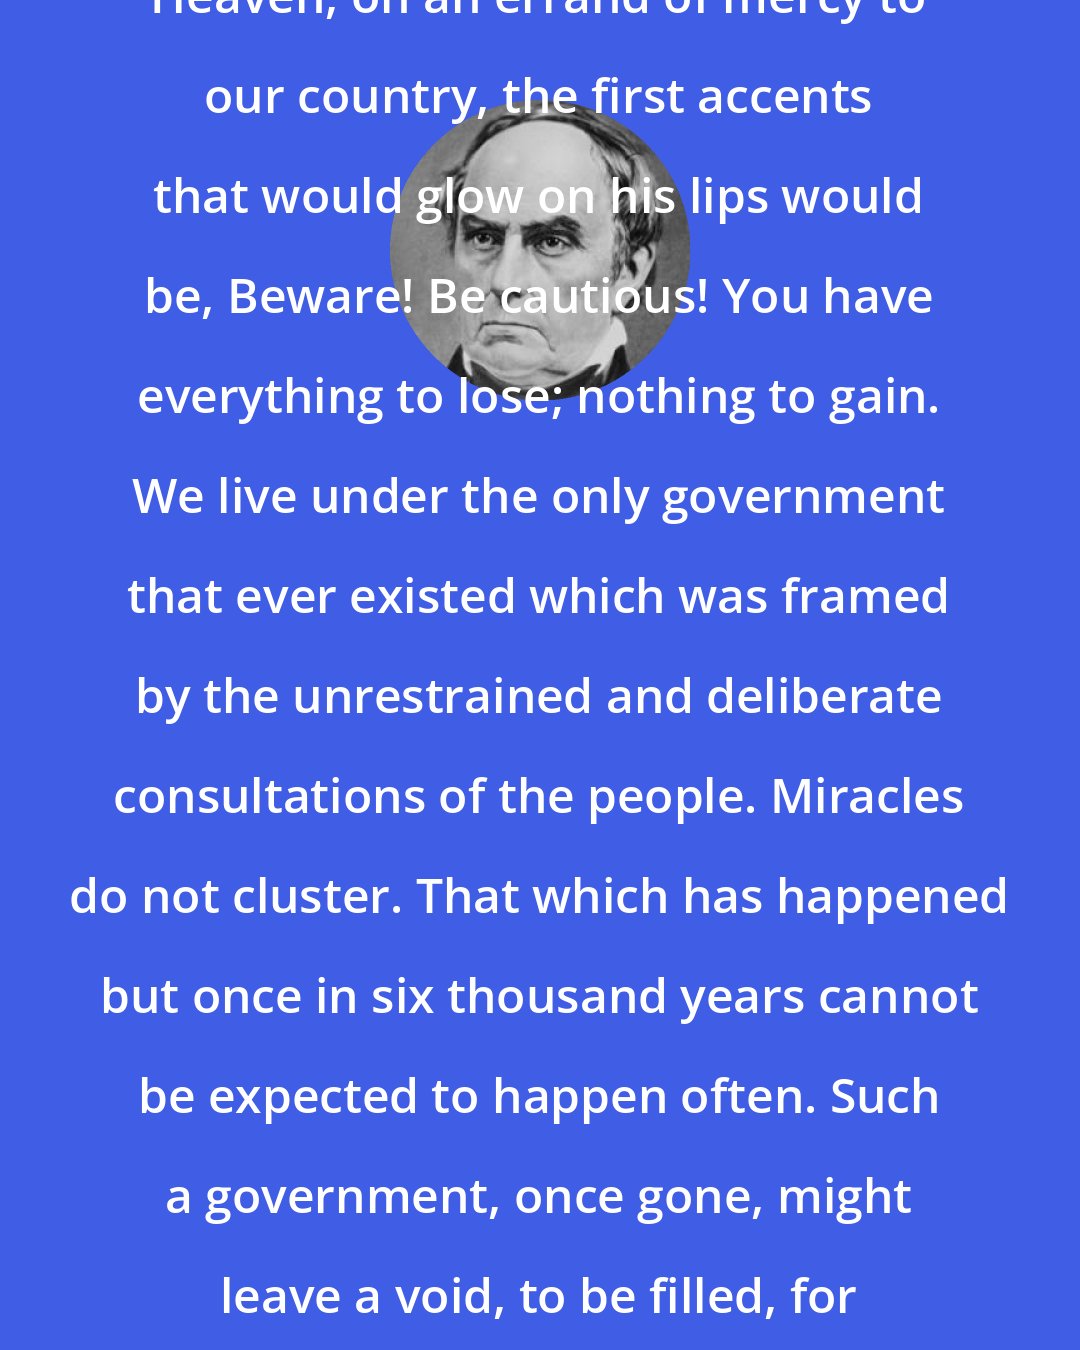 Daniel Webster: If an angel should be winged from Heaven, on an errand of mercy to our country, the first accents that would glow on his lips would be, Beware! Be cautious! You have everything to lose; nothing to gain. We live under the only government that ever existed which was framed by the unrestrained and deliberate consultations of the people. Miracles do not cluster. That which has happened but once in six thousand years cannot be expected to happen often. Such a government, once gone, might leave a void, to be filled, for ages, with revolution and tumult, riot and despotism.